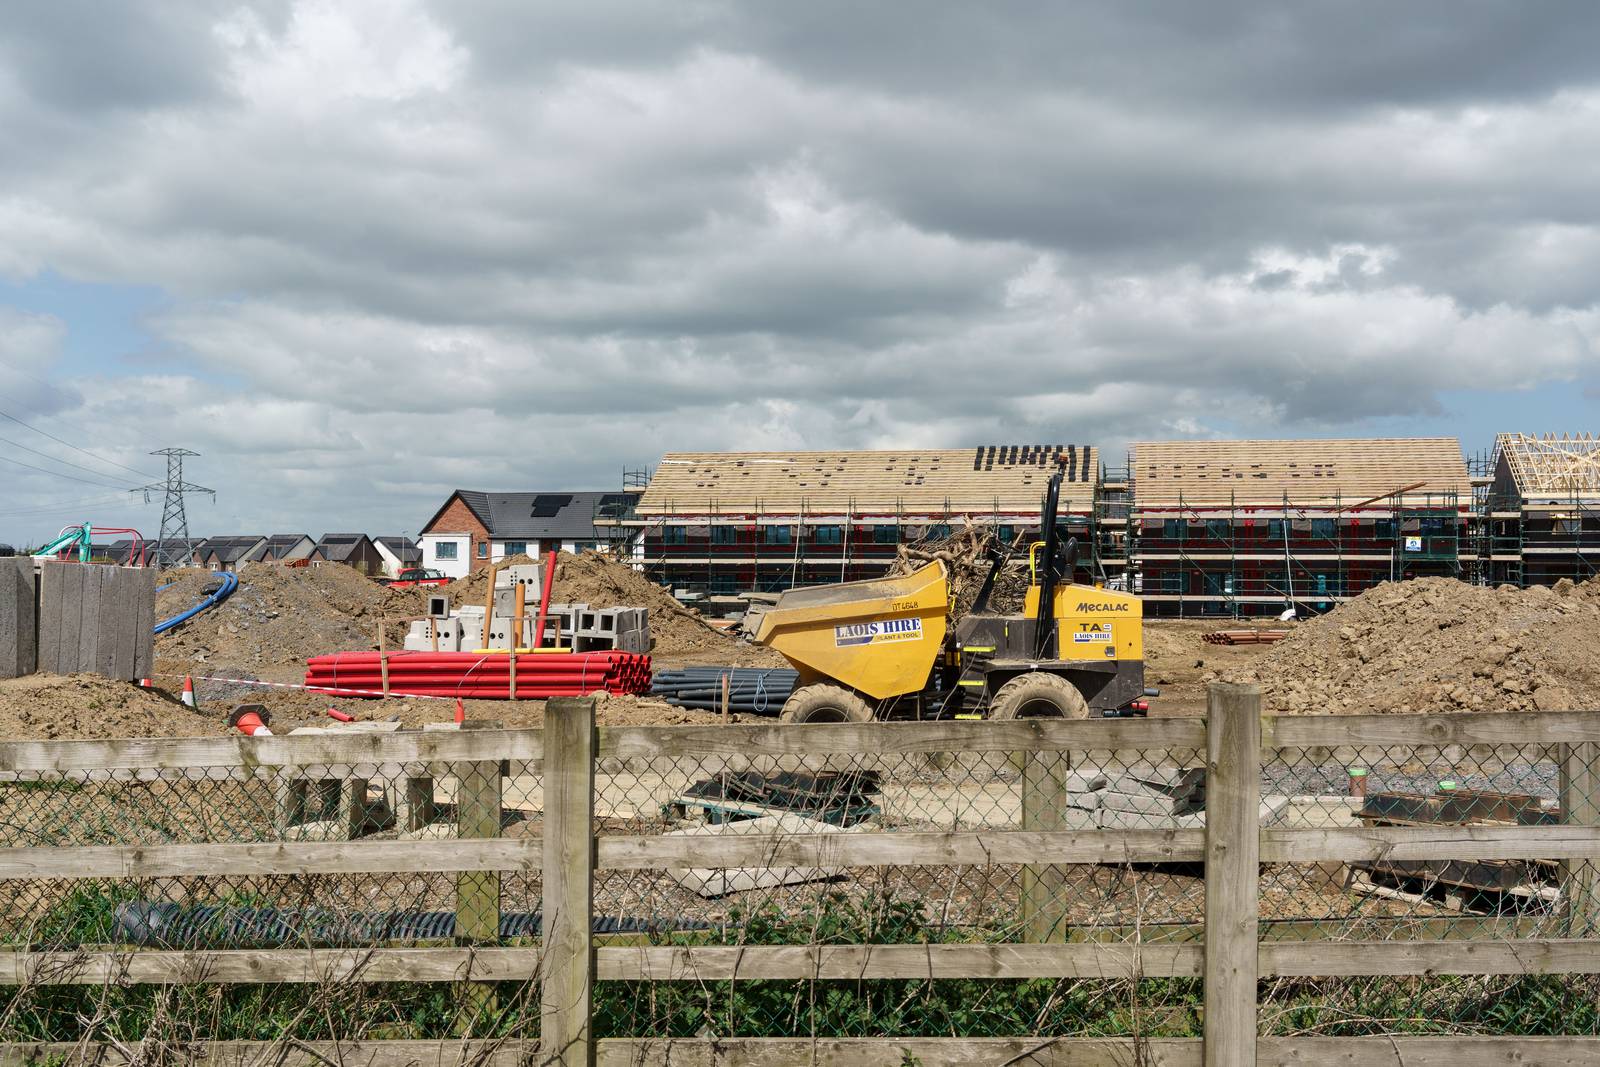 Builders working in Bay Meadows, a housing estate under construction, in west Dublin, Ireland, on Tuesday, May 11, 2021. The mass purchase of affordable houses  on the market for about 400,000 euros ($490,000)  set off a public firestorm and highlights the growing tension over the squeeze in urban housing and the role of large investors. Photographer: Paulo Nunes dos Santos/Bloomberg